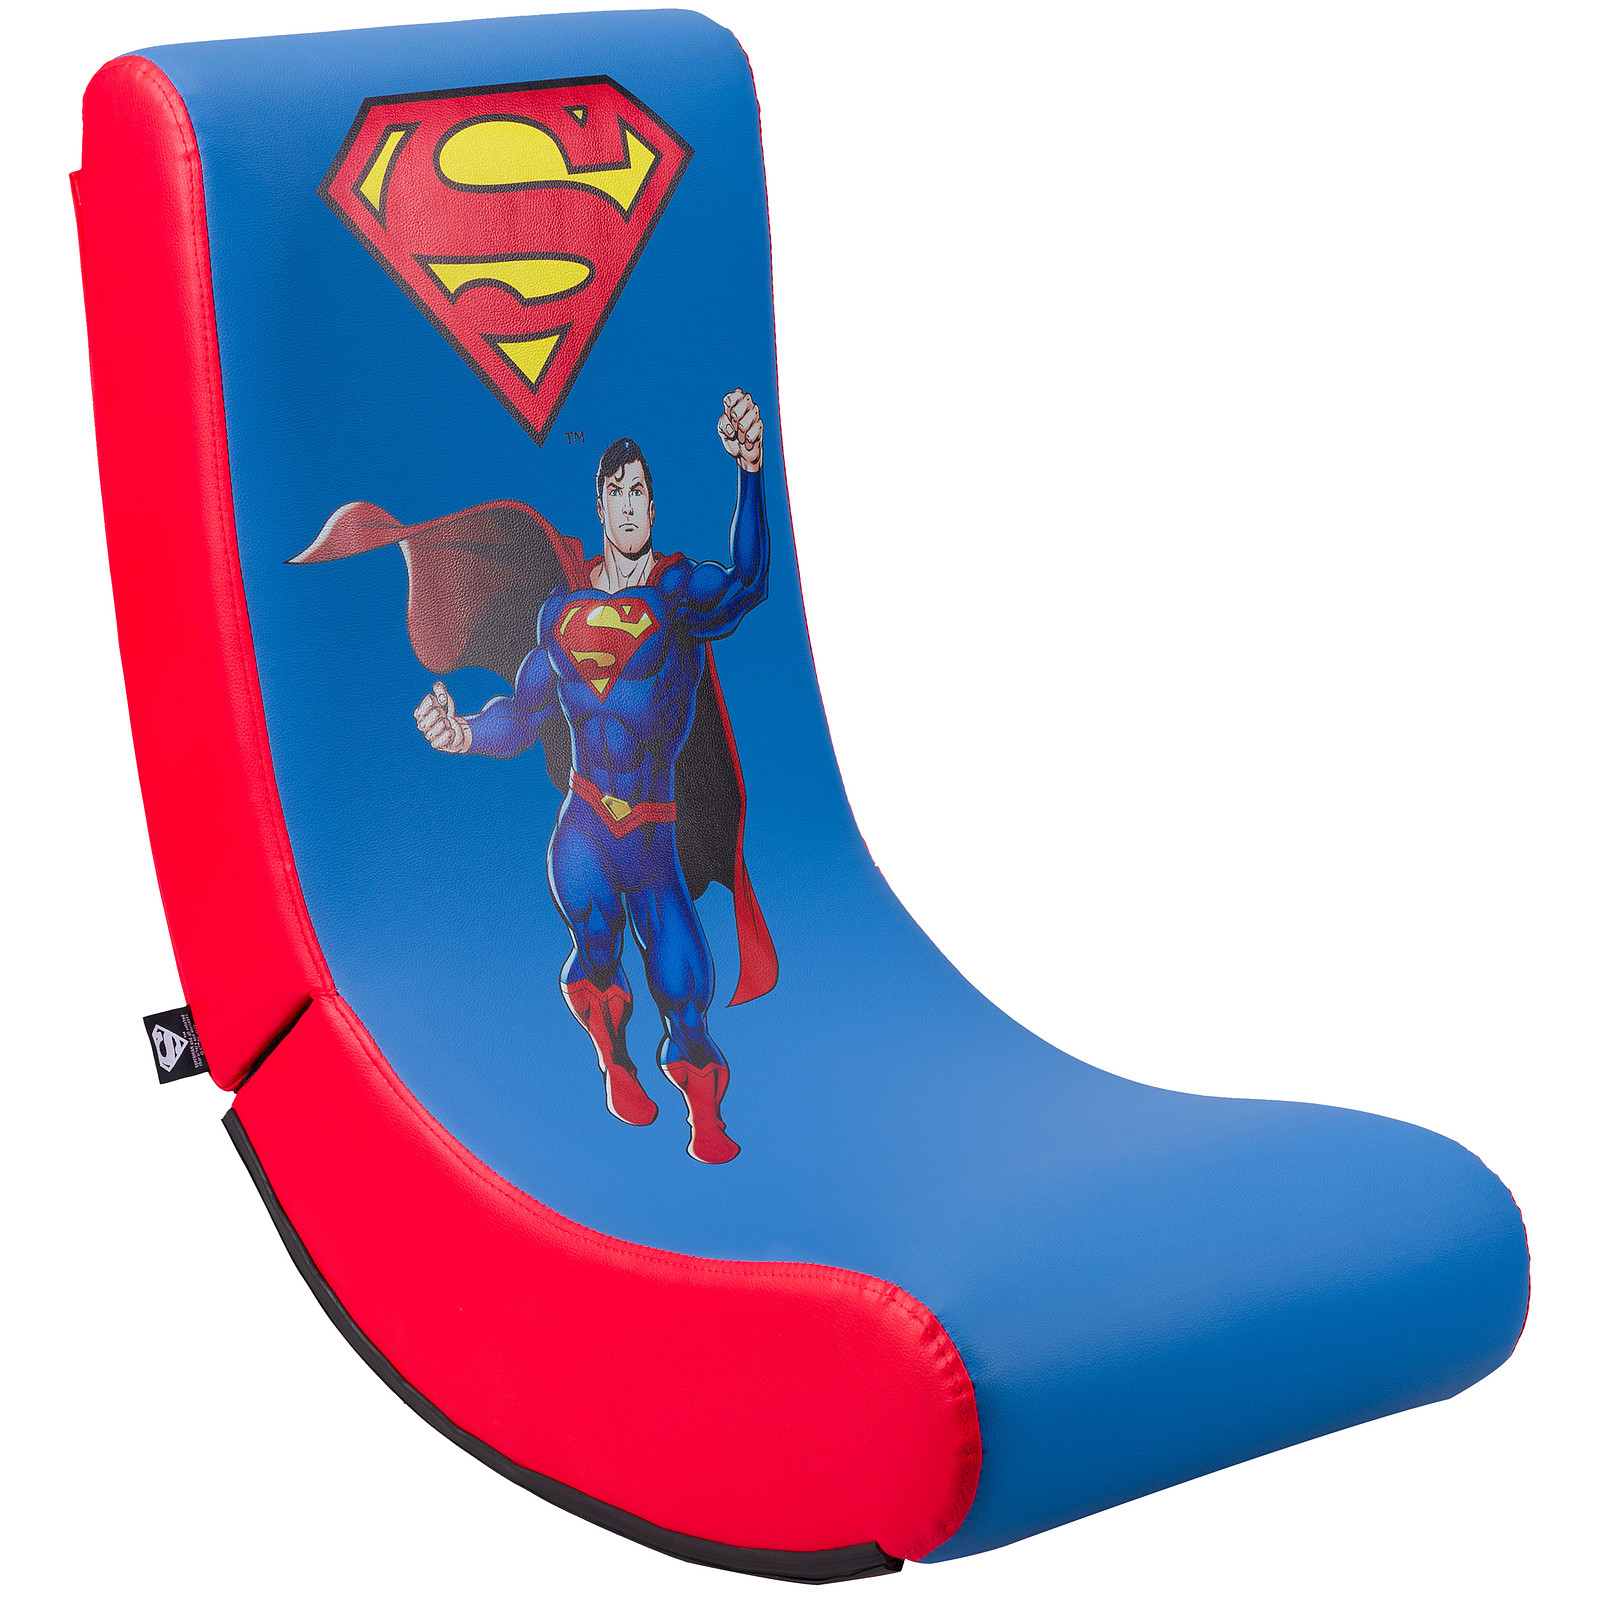 Subsonic Fauteuil Rock'N'Seat Superman Junior - Fauteuil gamer Subsonic